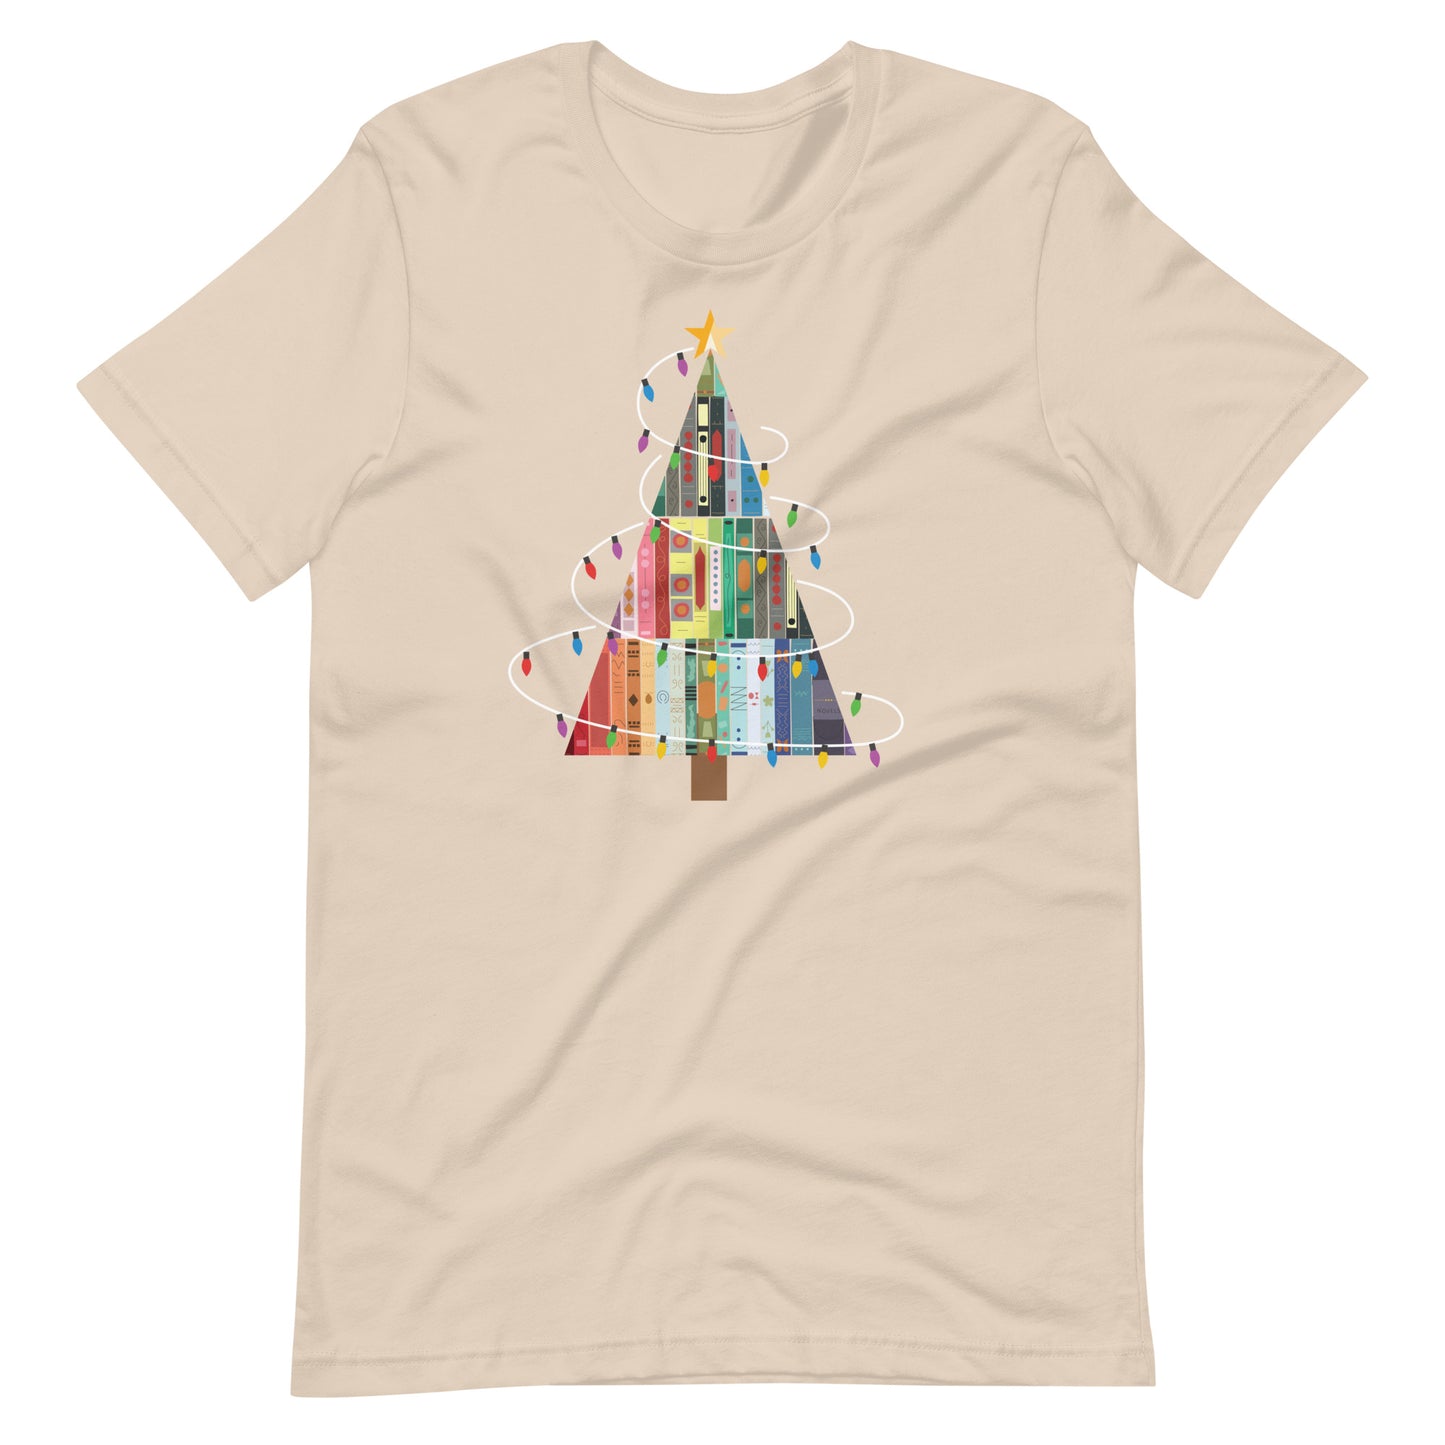 Librarian Christmas Holiday T-Shirt - Festive Book Tree Design